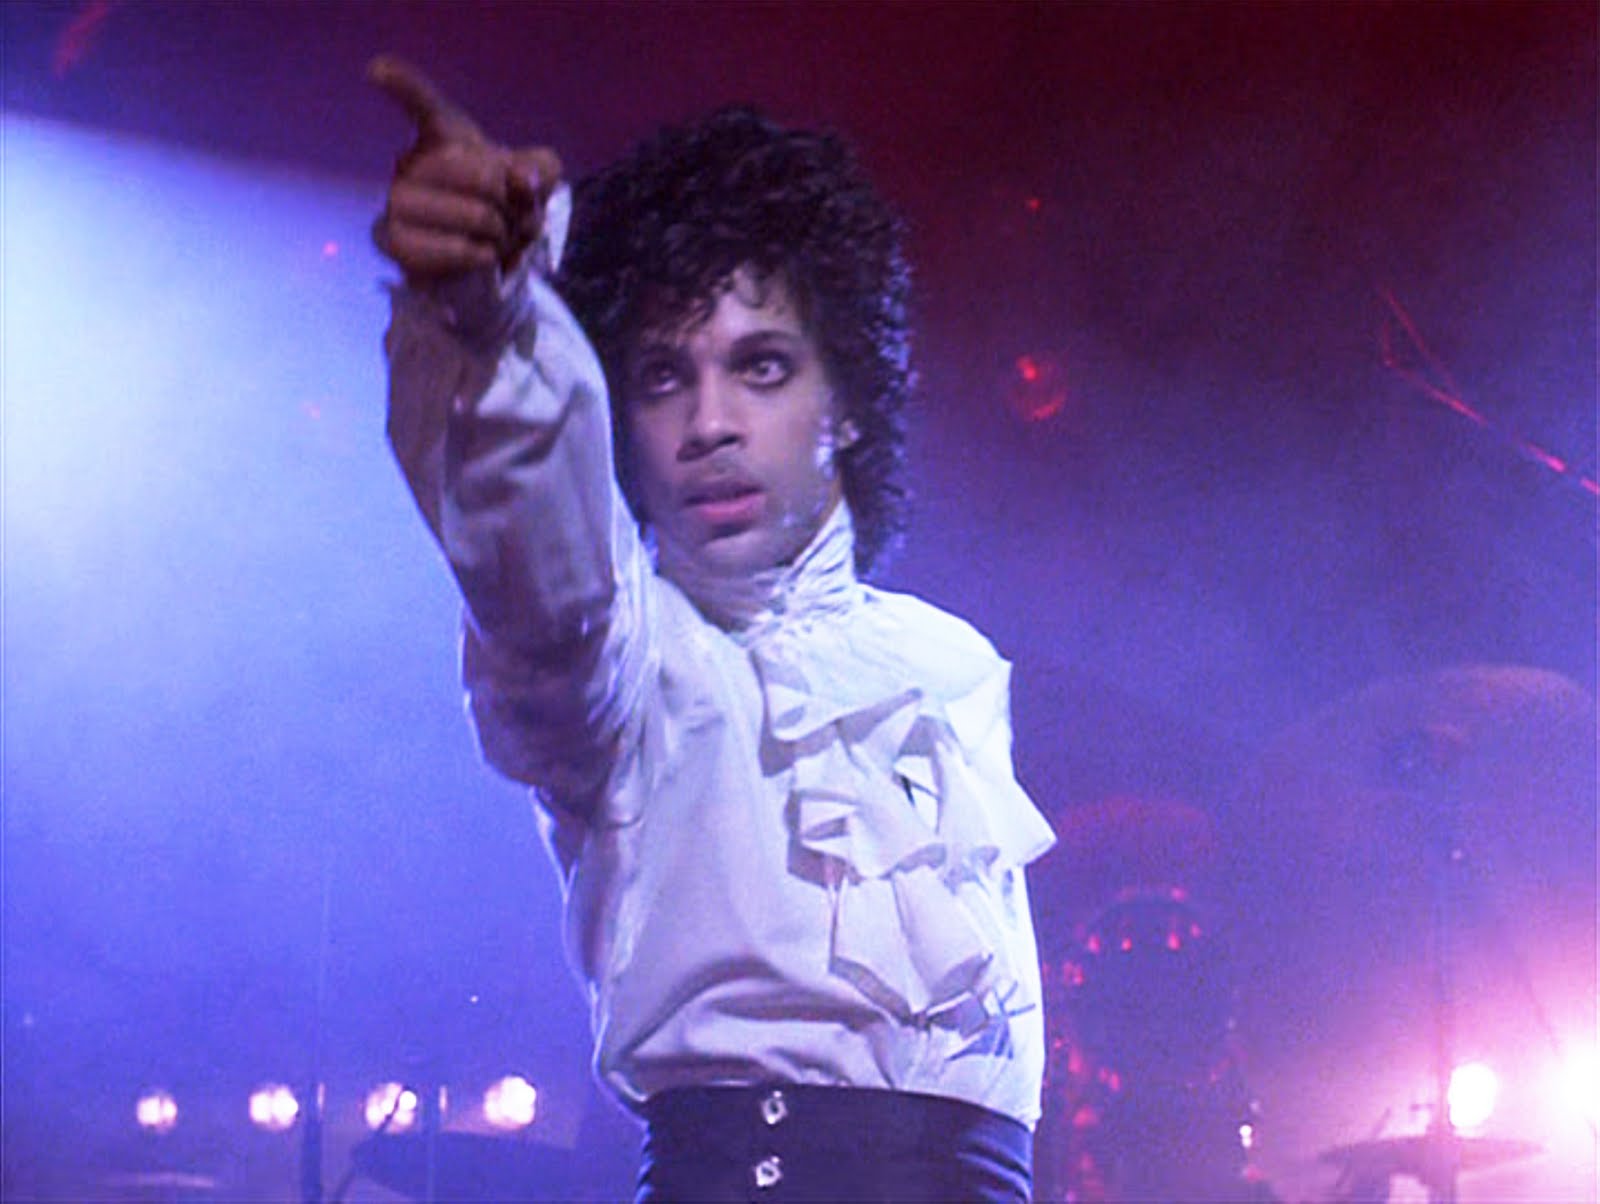 Prince pointing Blank Meme Template